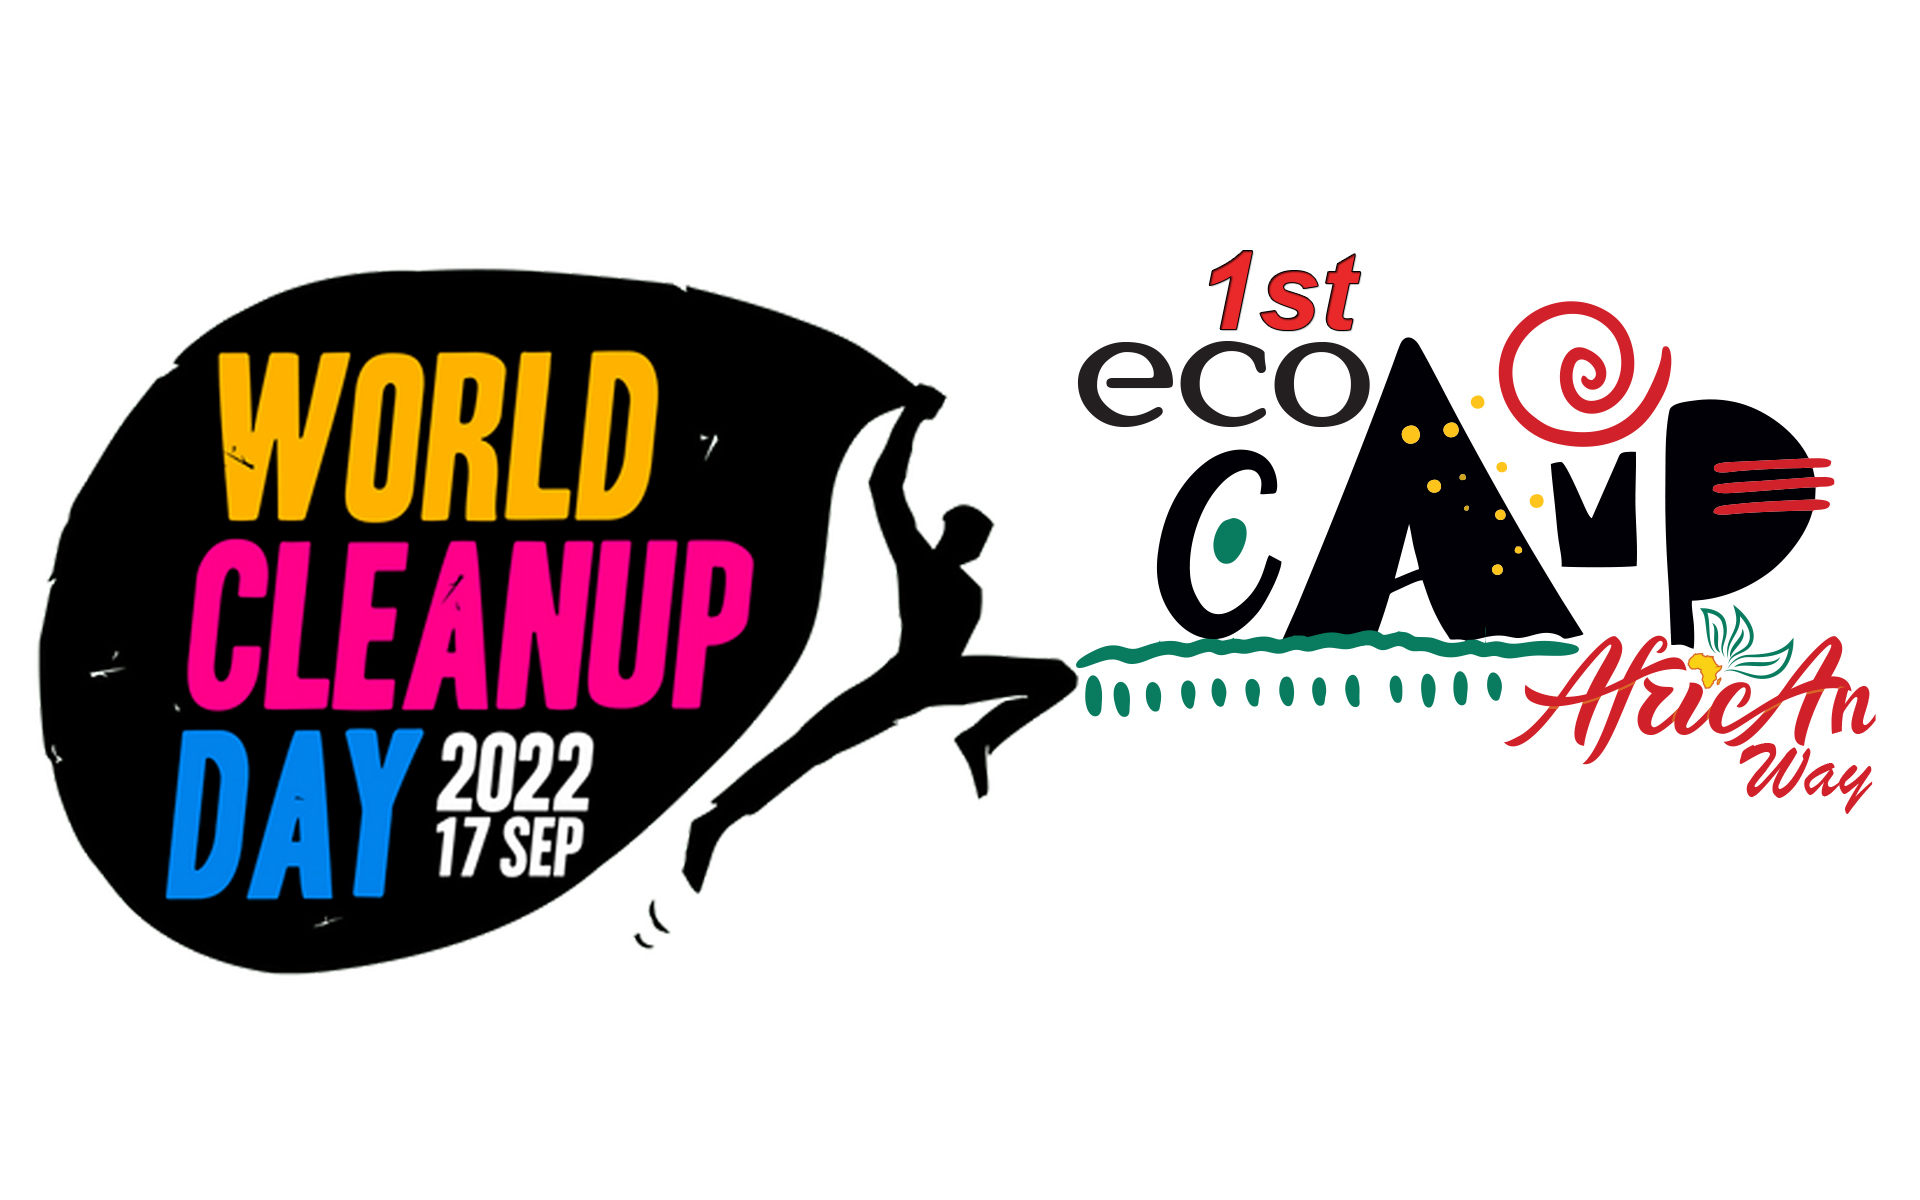 africanway_blog_1st_ecocamp_worldcleanupday22